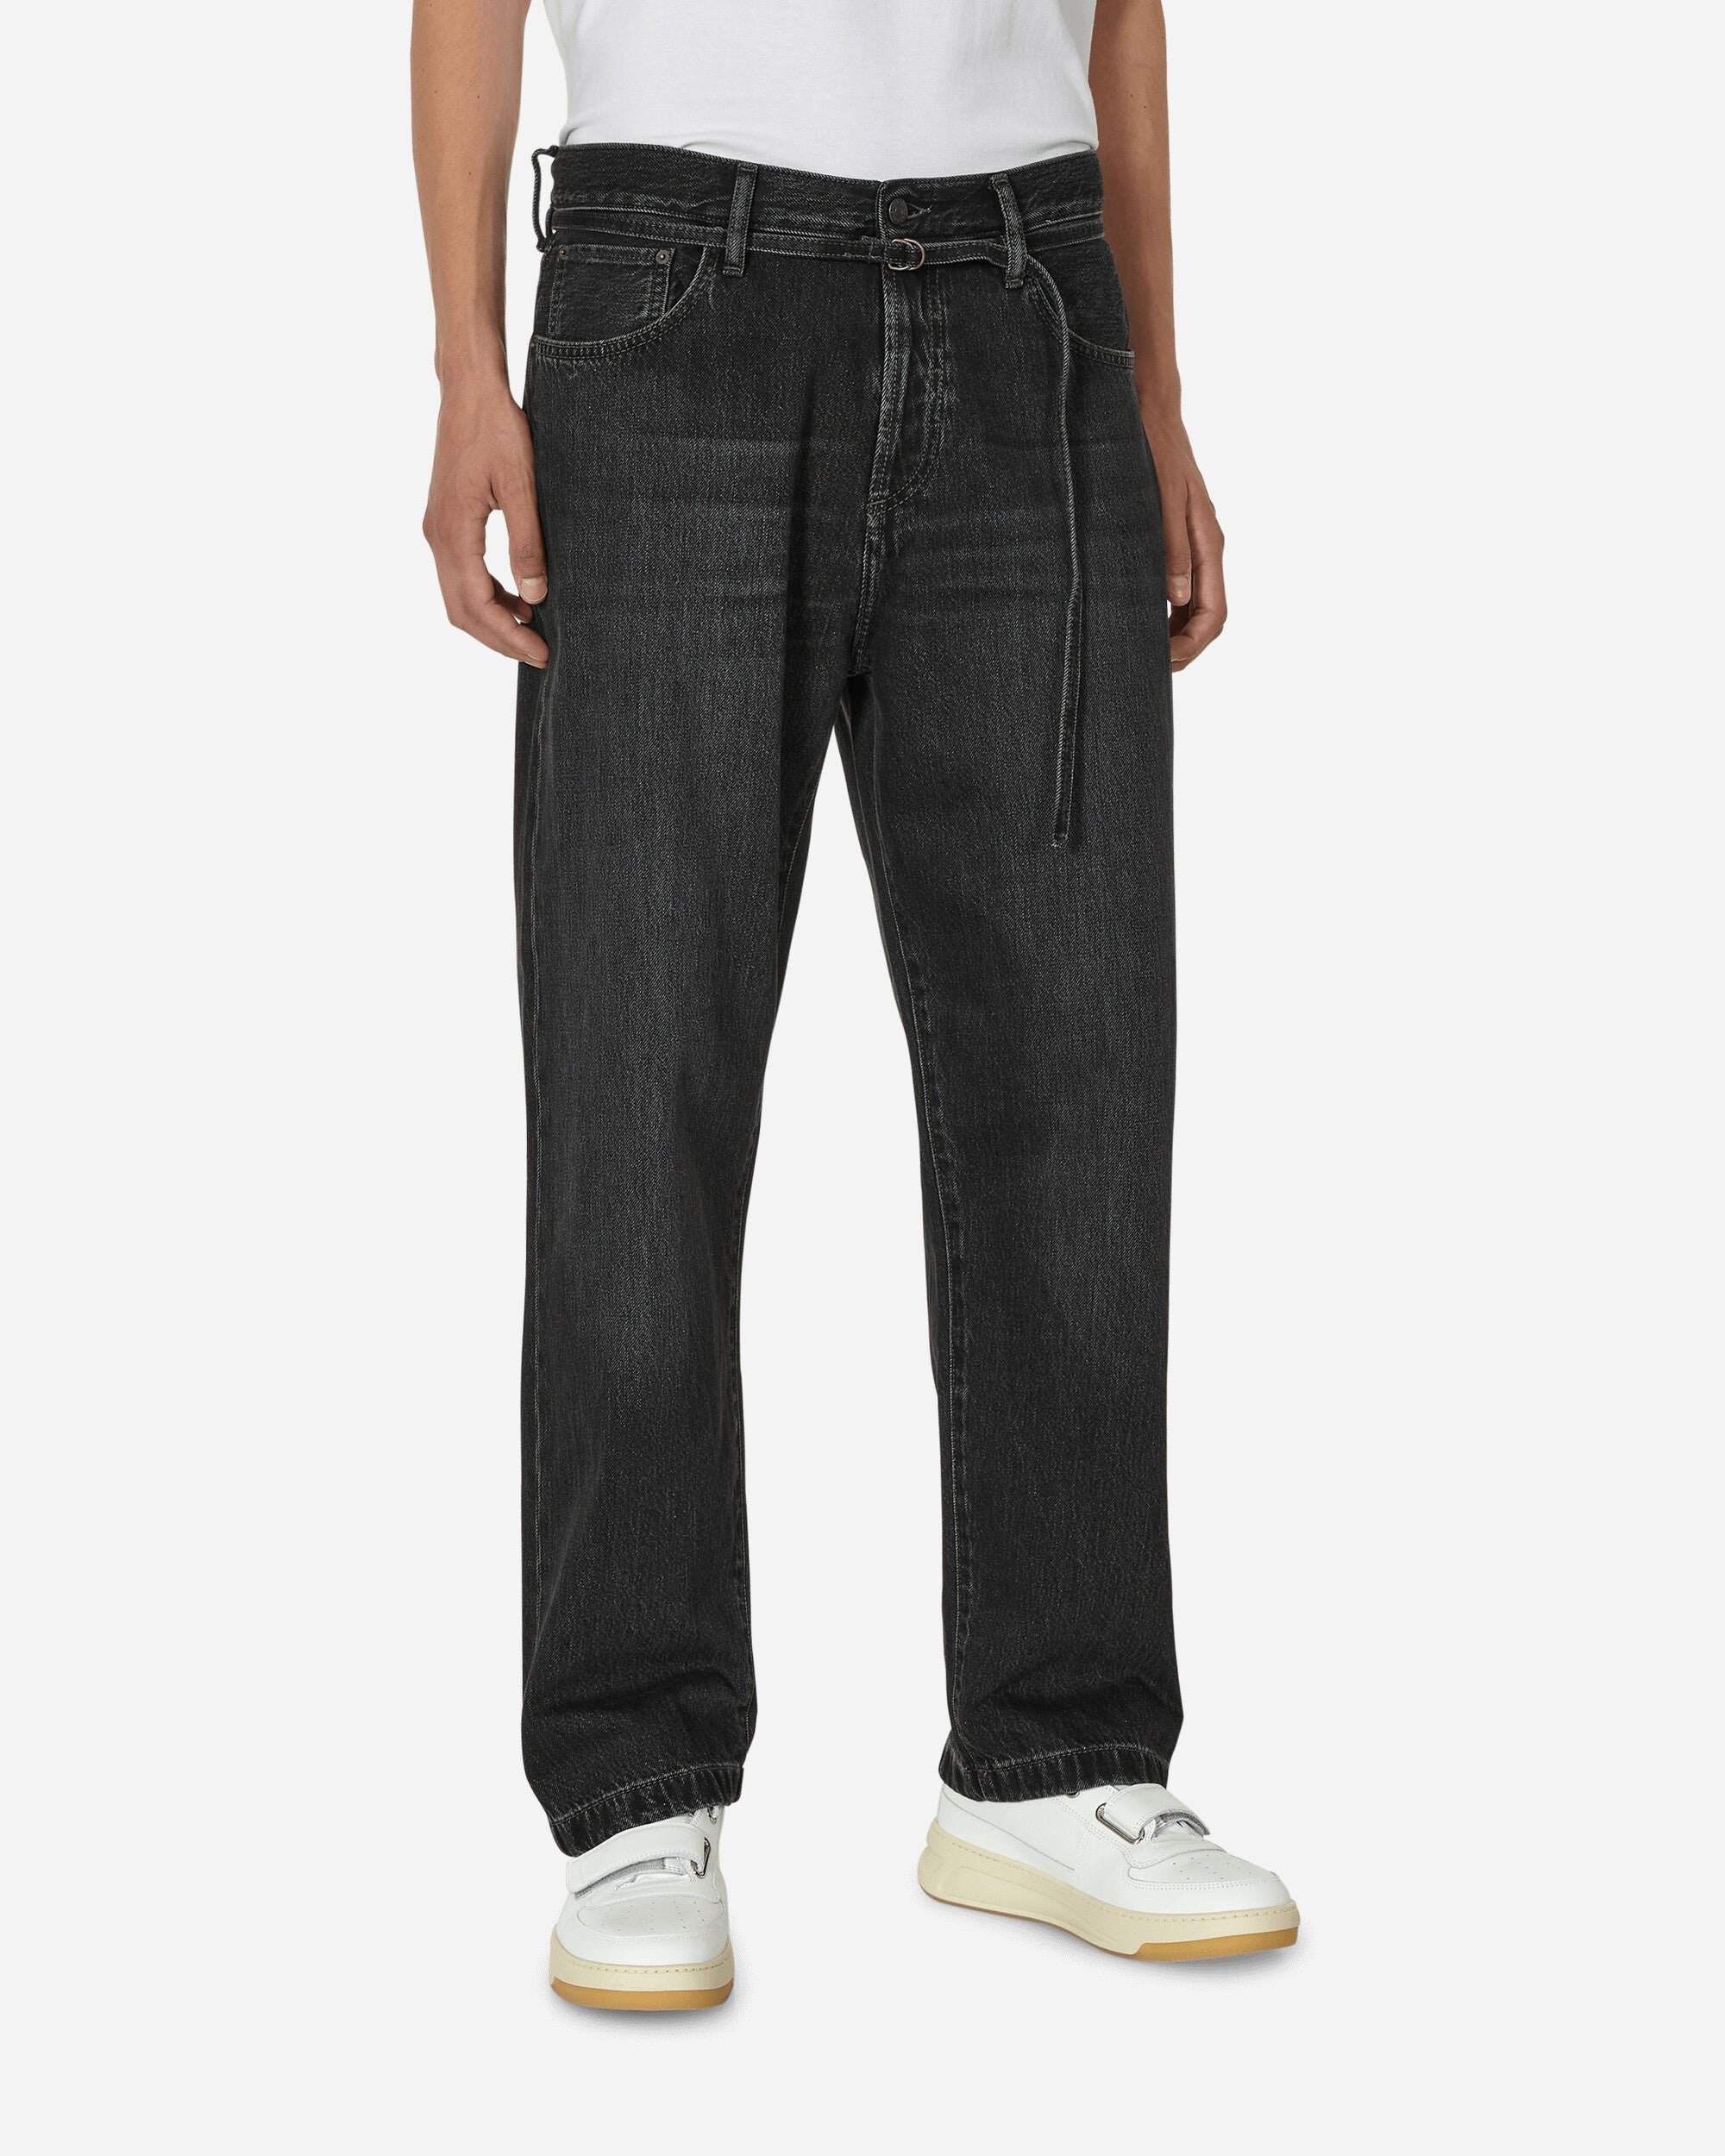 Acne Studios - Relaxed fit jeans -1993 - Black